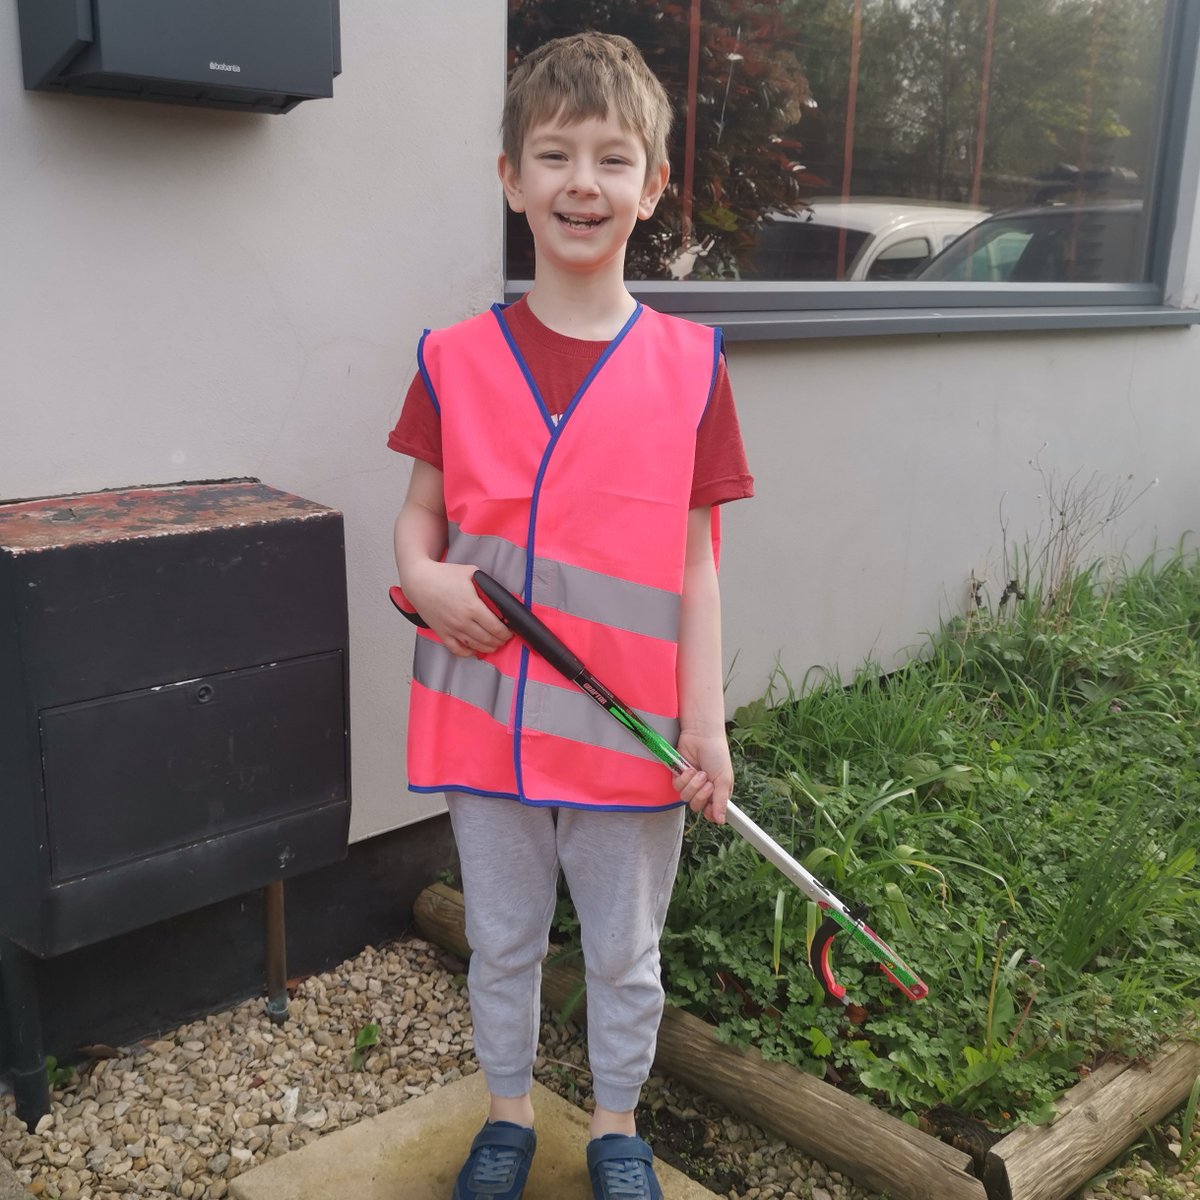 Congratulations to the #BigTidy's newest Little Big Tidier, Jack! 👏 He completed his litter picks around Avonmouth with mum Claire, and received his very own mini litter picker & hi-vis so he can keep the sparkle going. ✨ Join the Little Big Tidiers: bristolwastecompany.co.uk/little-big-tid…